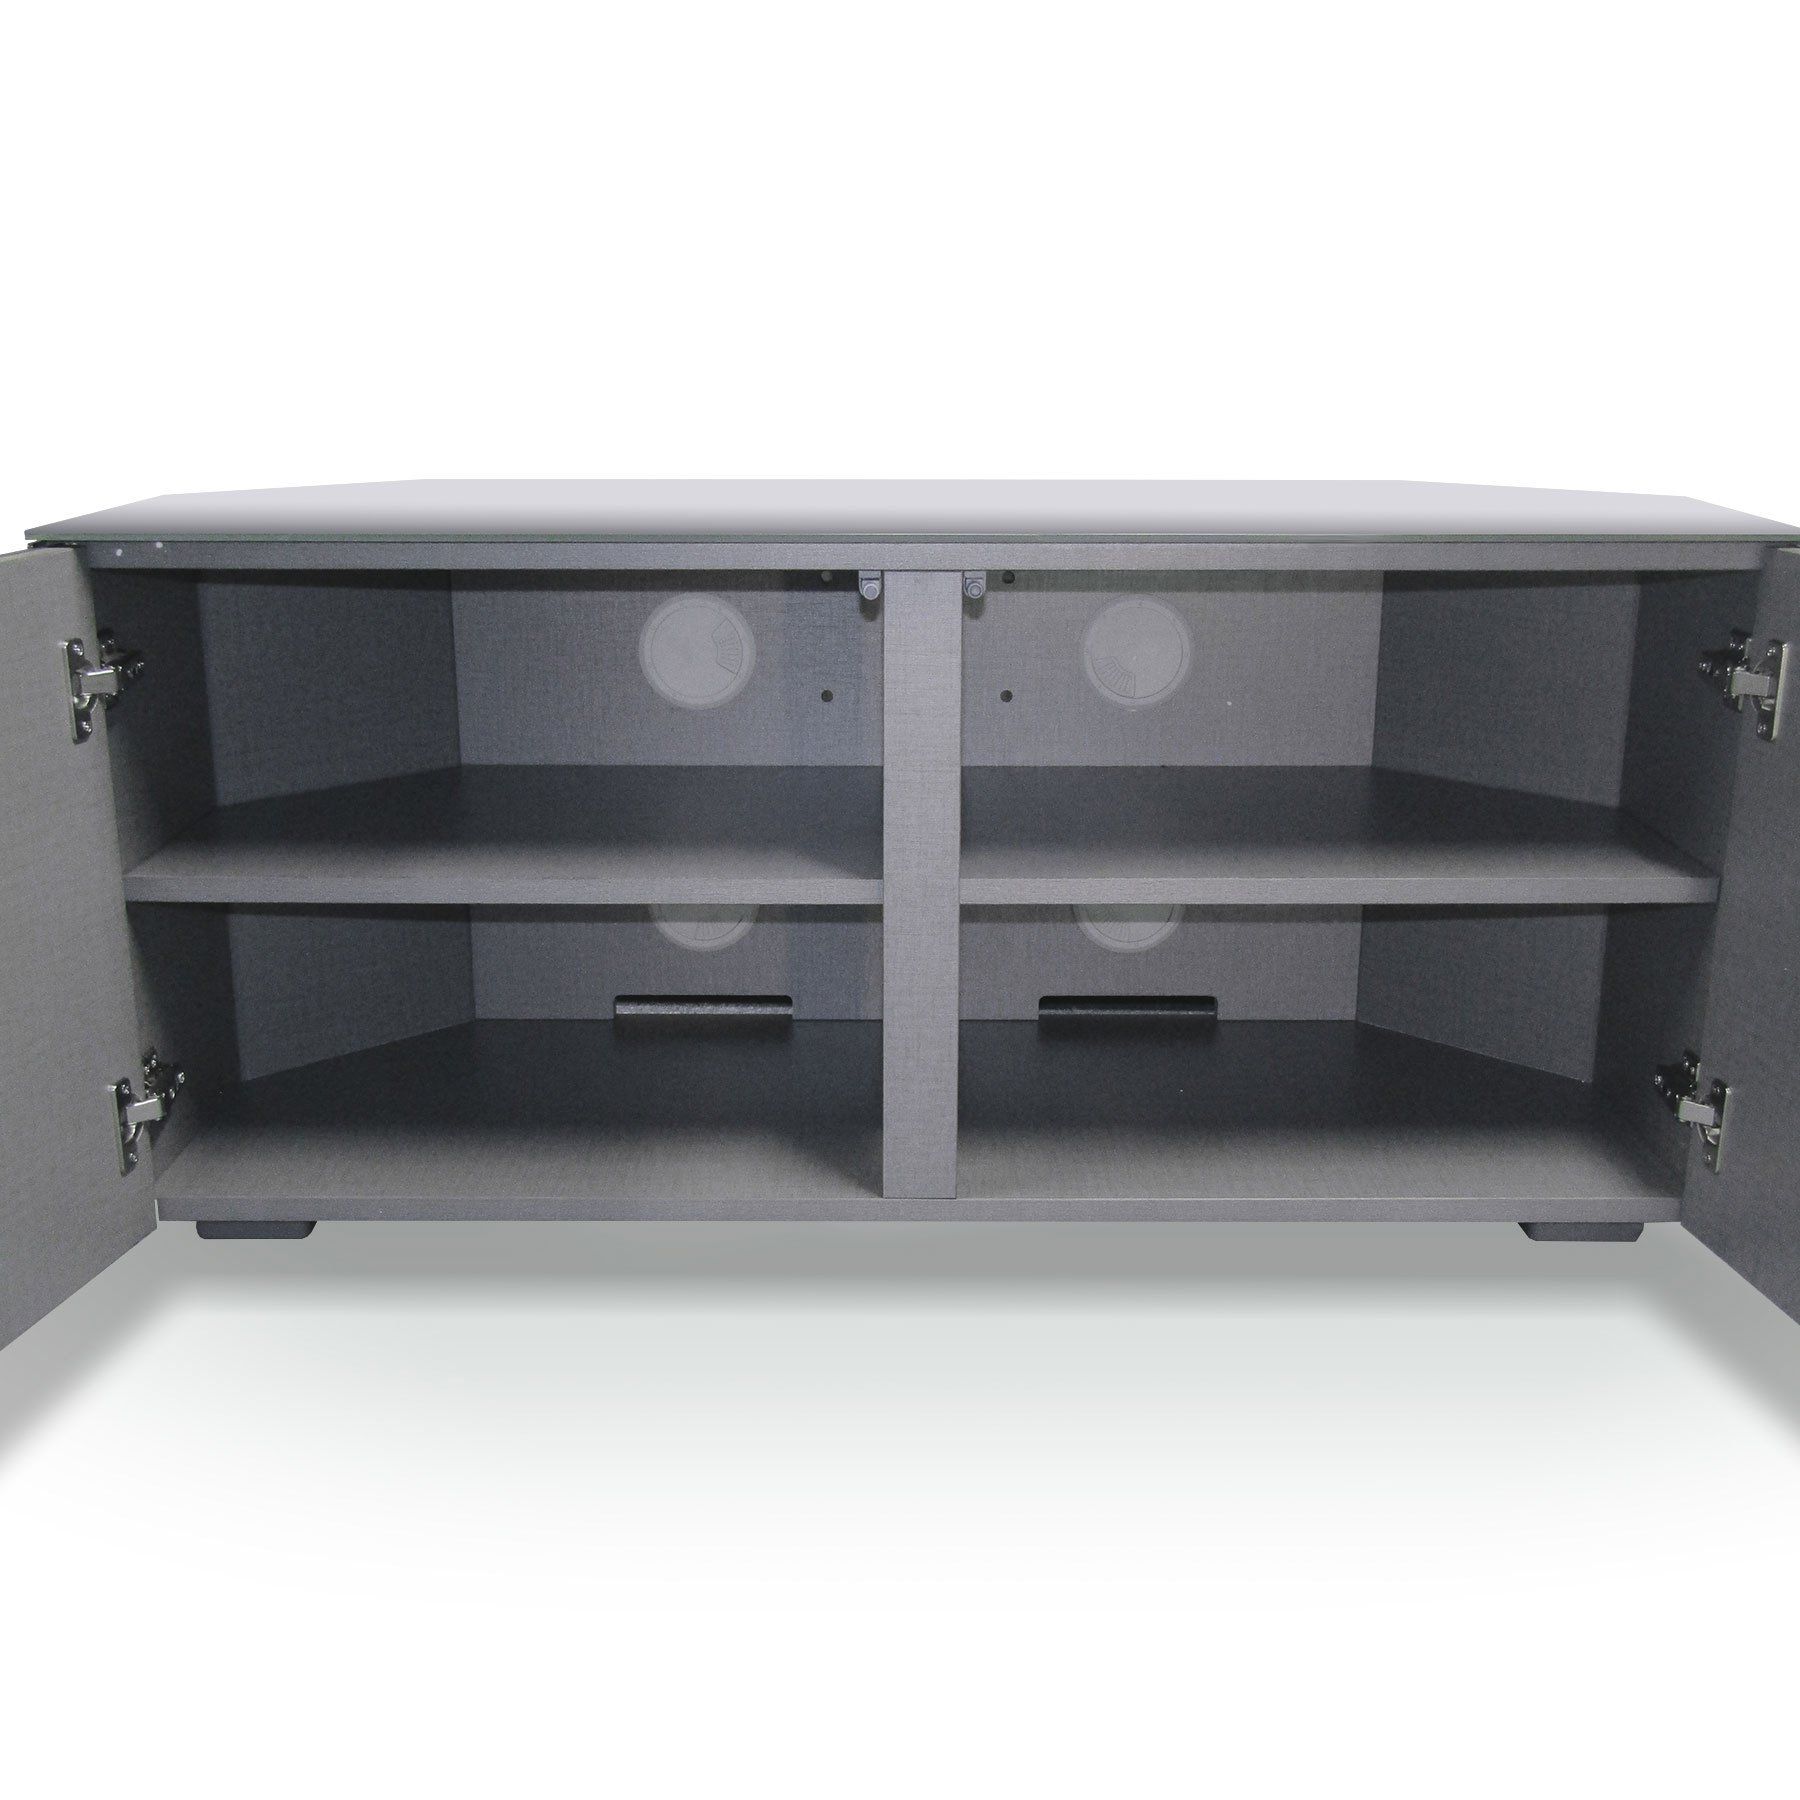 Invictus Black High Gloss Corner Tv Stand For Up To 55" Tvs Inside Tv Cabinets Black High Gloss (Photo 8 of 15)